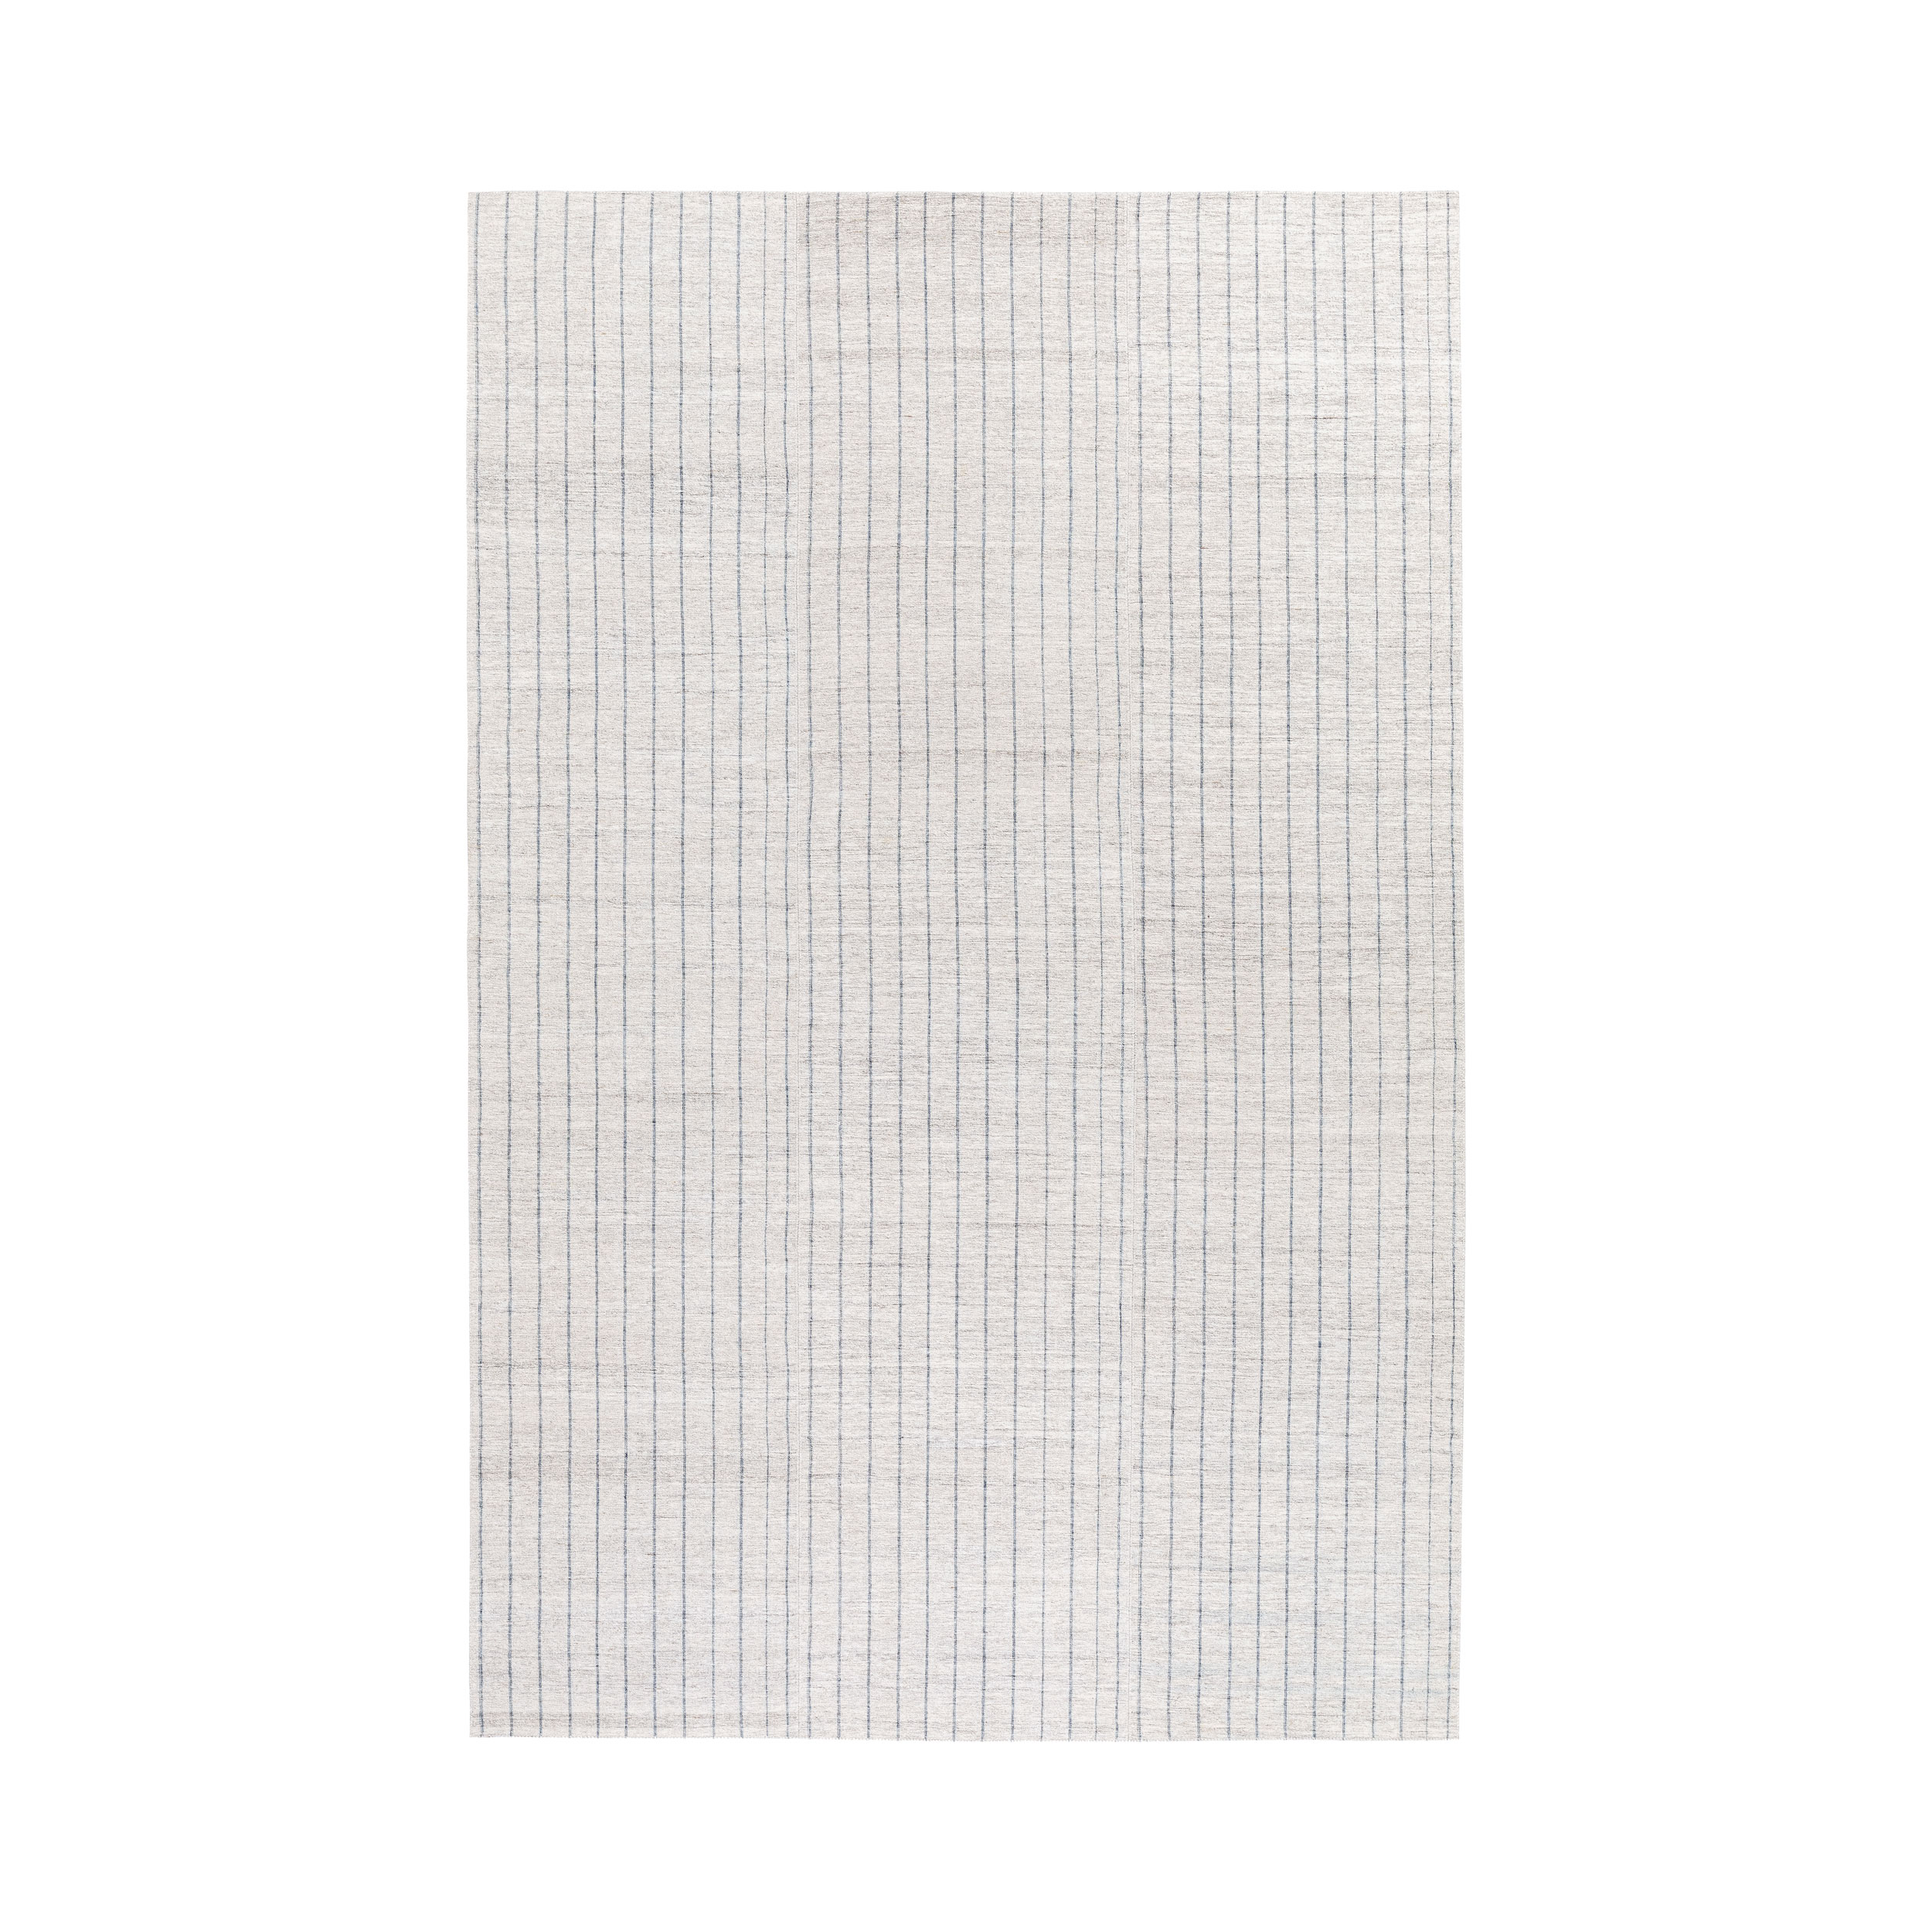 Pelas flatweave rug with a striped design that is made with handspun wool and natural dyes